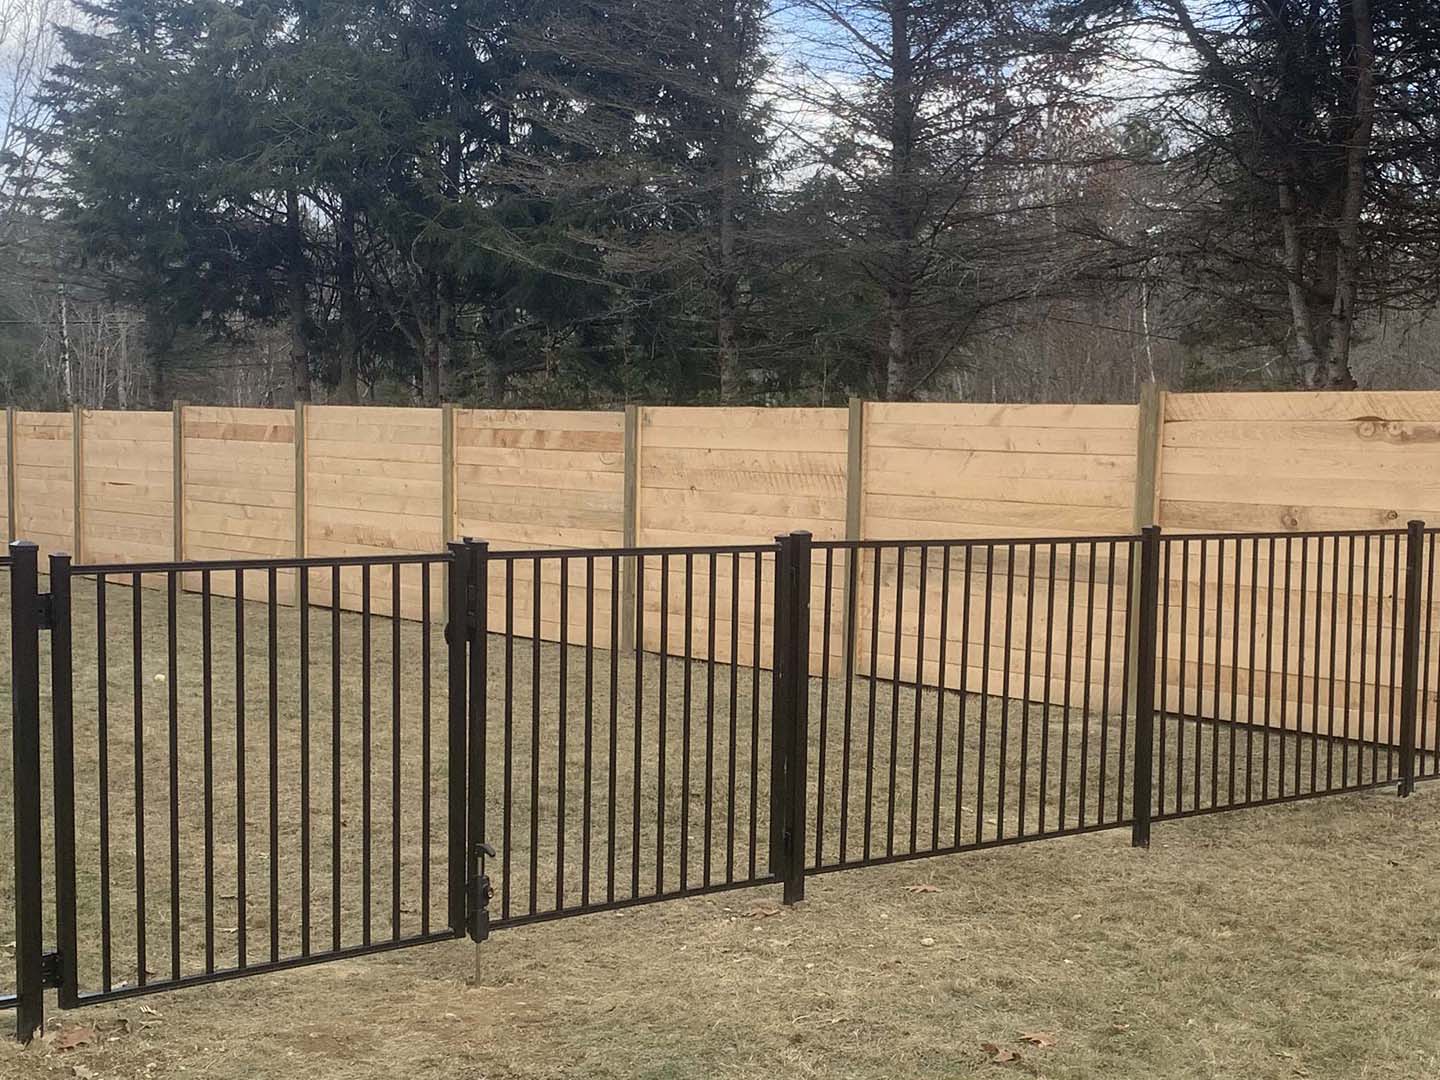 Photo of a Southern New Hampshire wood fence and a Southern New Hampshire aluminum fence